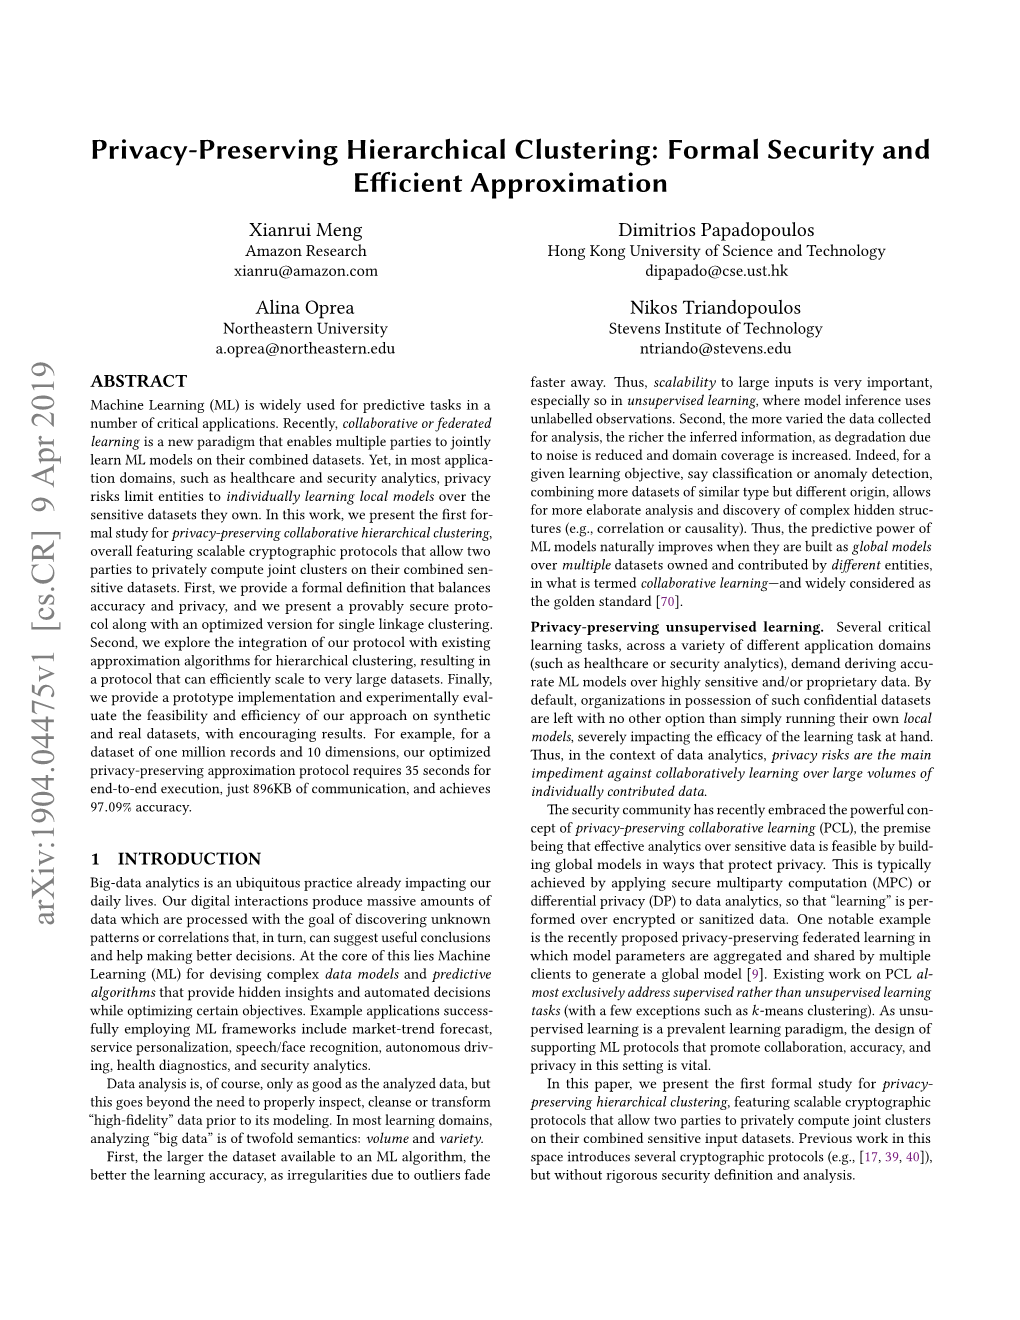 Privacy-Preserving Hierarchical Clustering: Formal Security and E€Icient Approximation